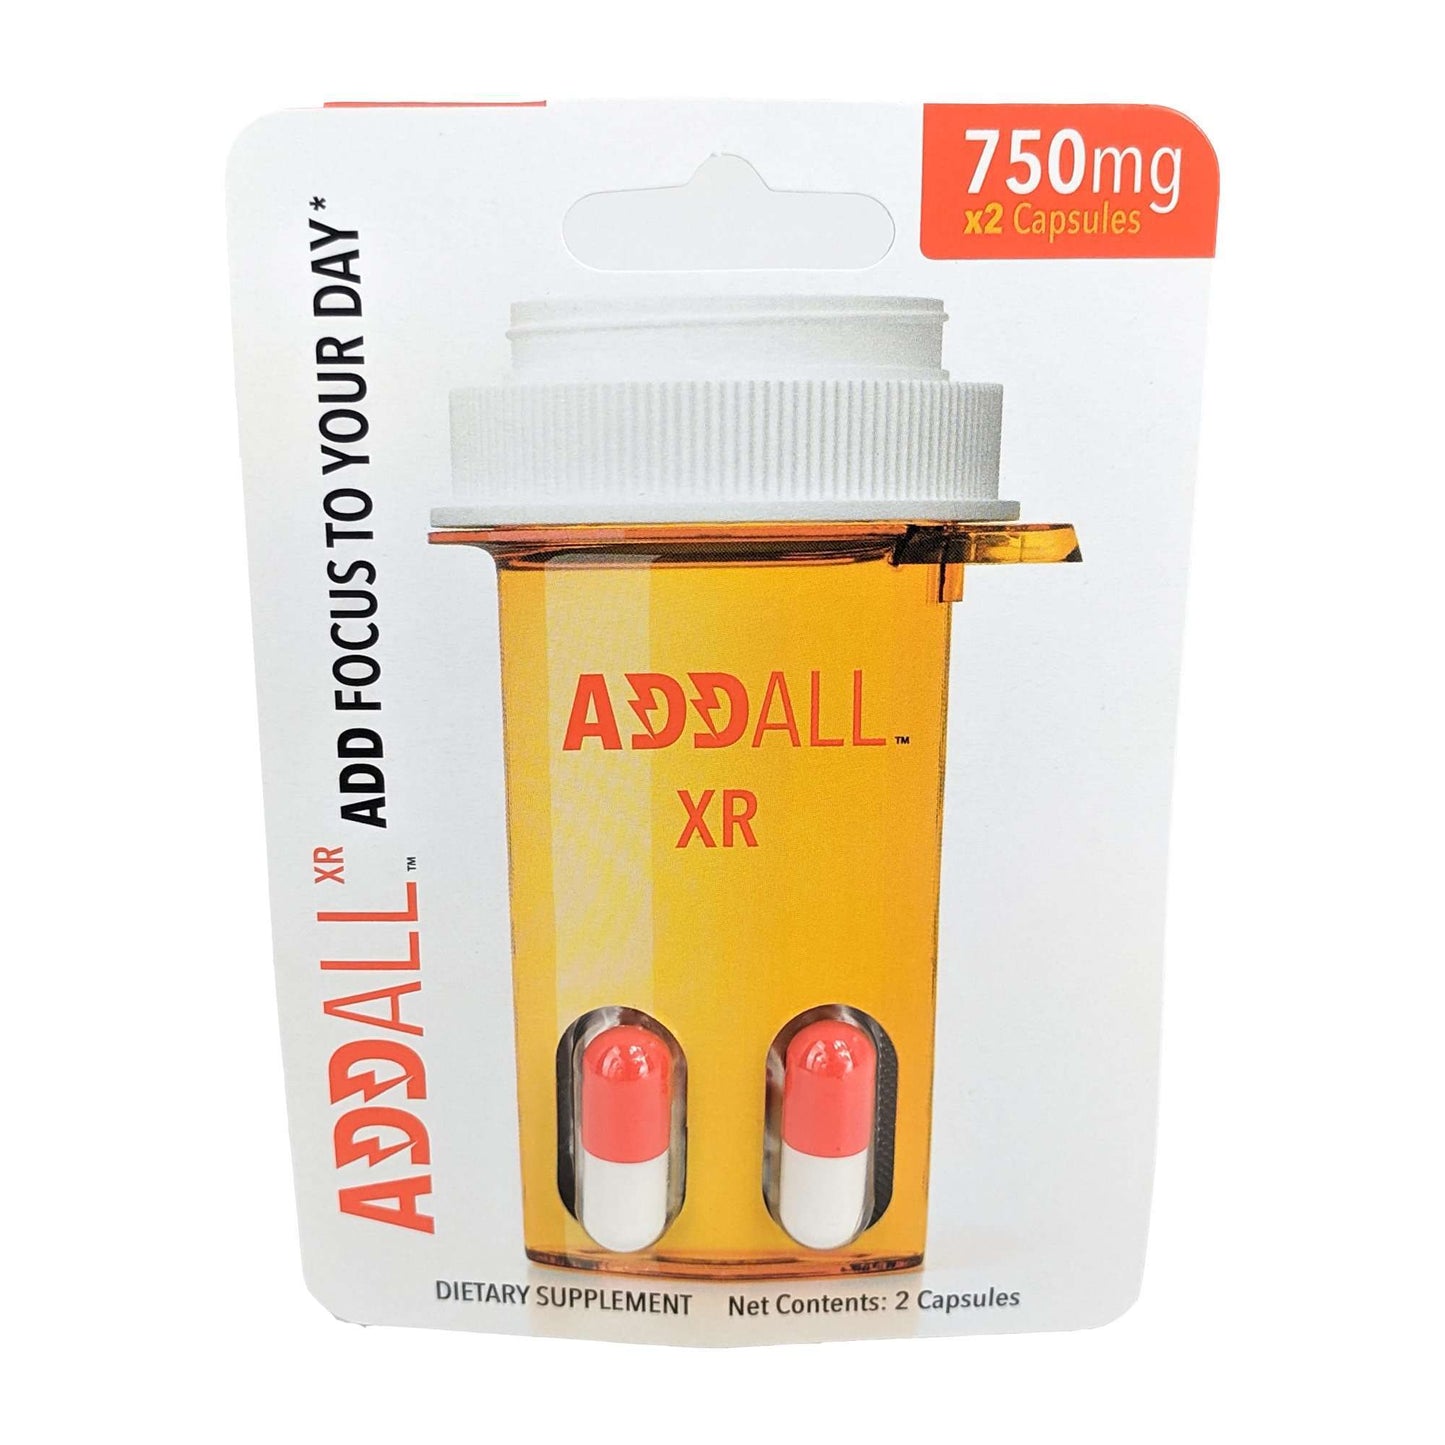 AddAll XR Capsules 750mg Energy & Focus Supplement - 12-Pack Box